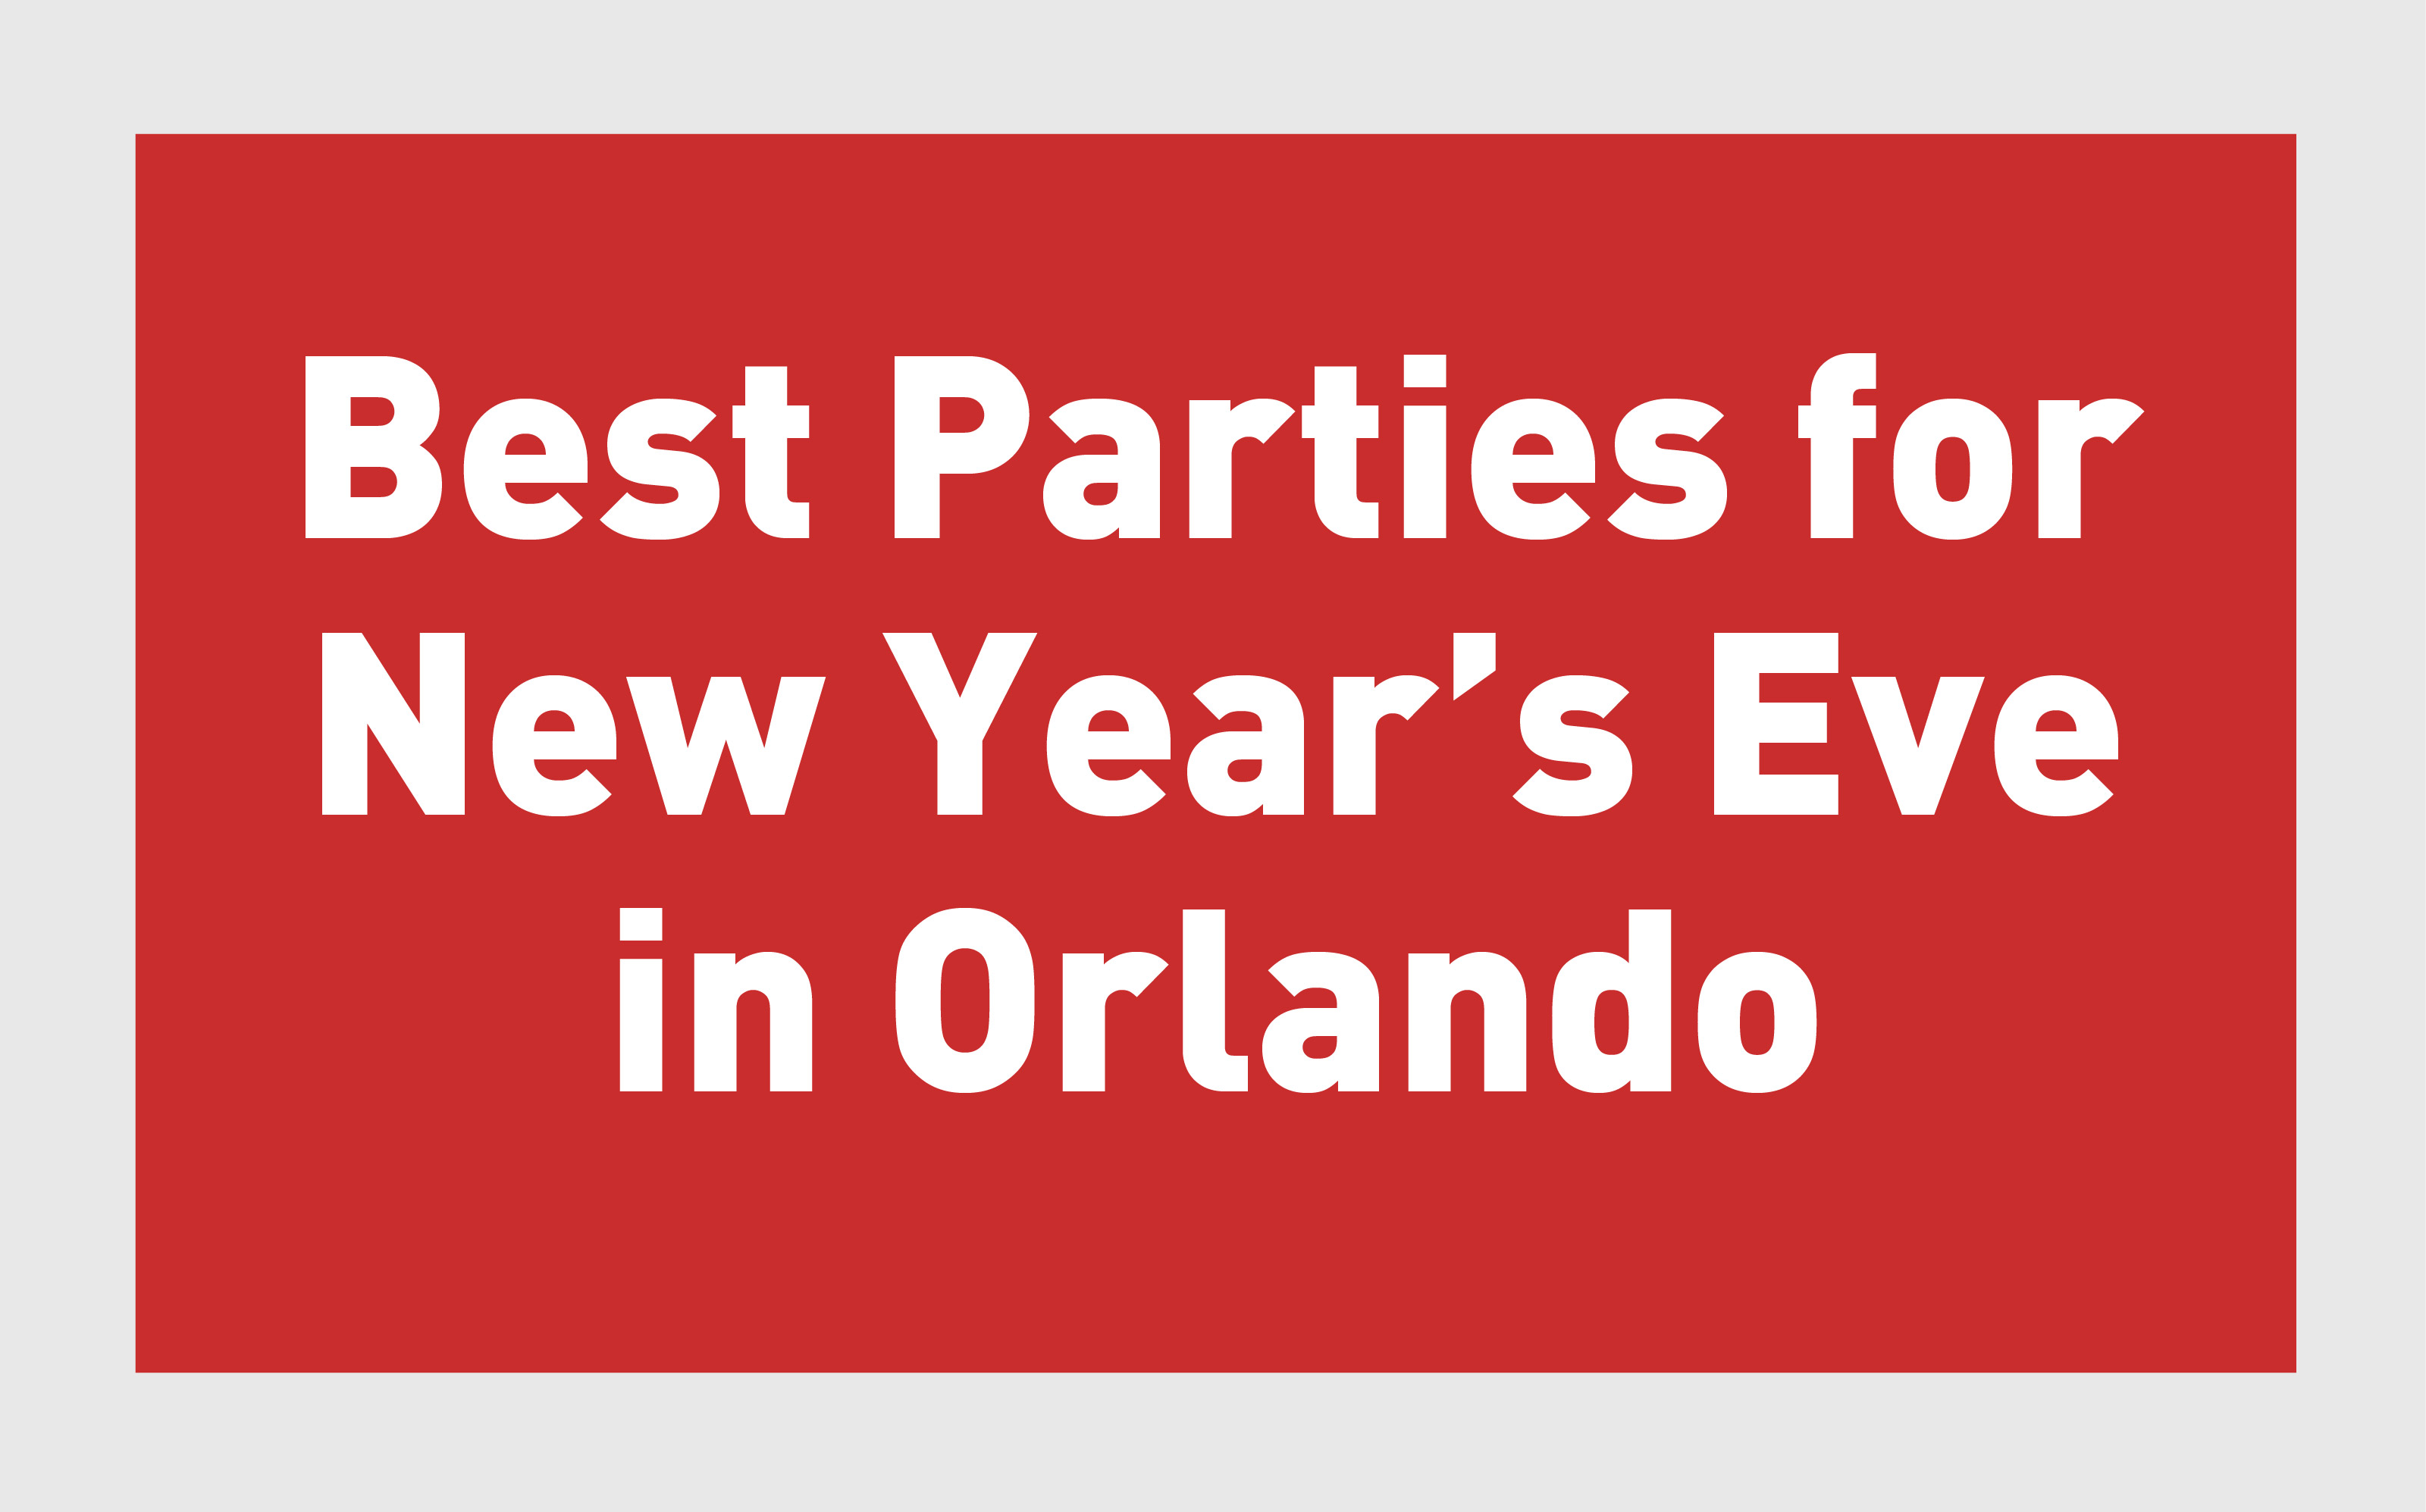 Best Parties for New Year’s Eve in Orlando